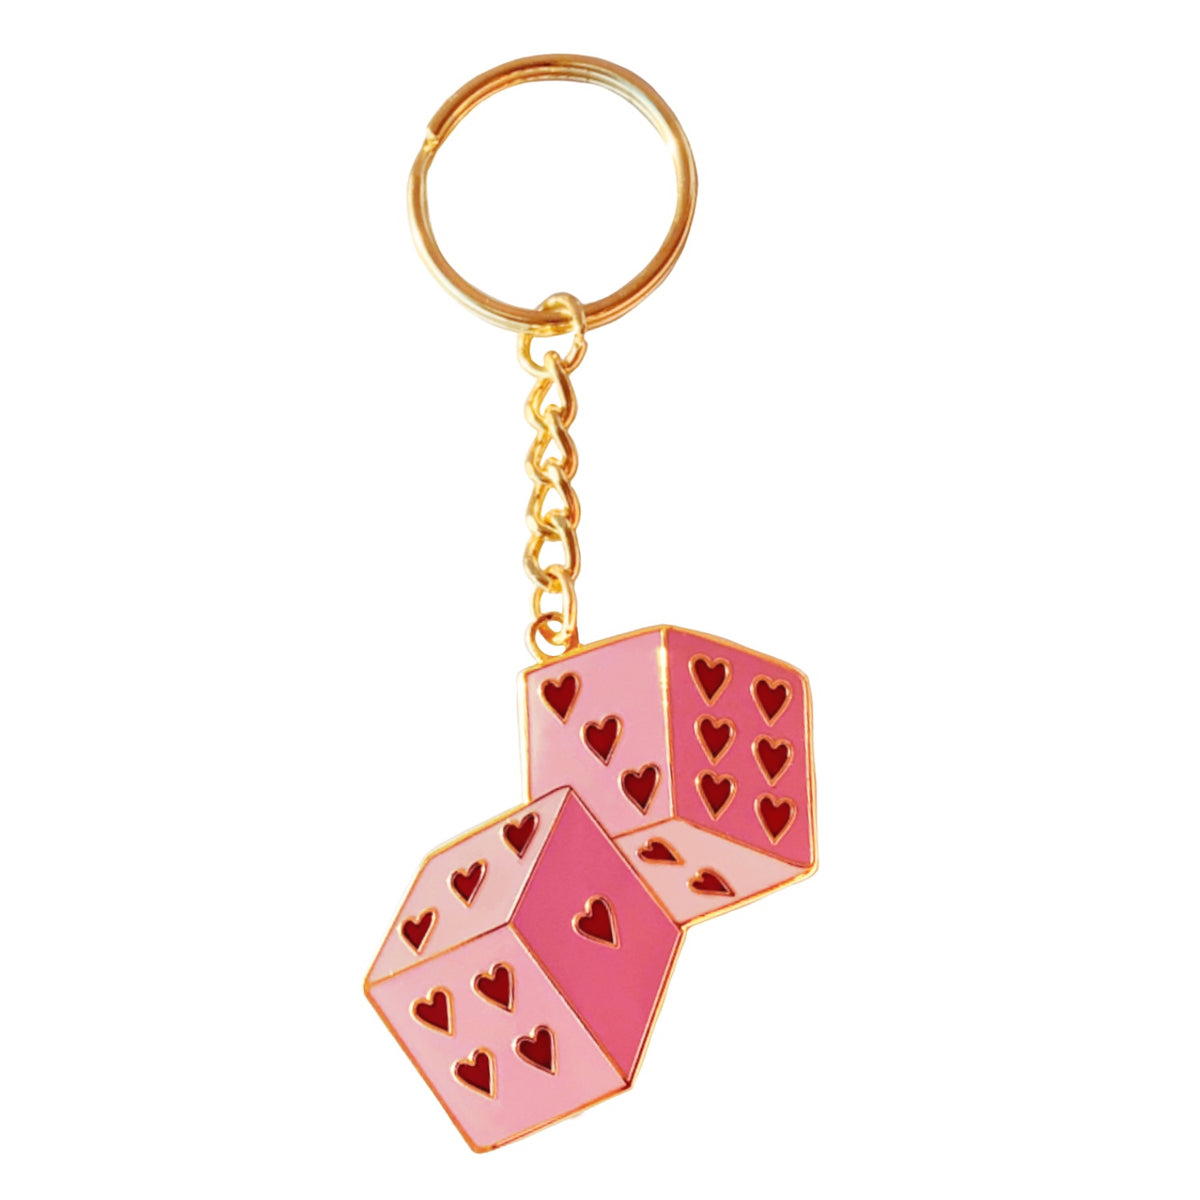 Multicolor Resin, Enamel and Metal Game On Dice Keychain Gold Hardware